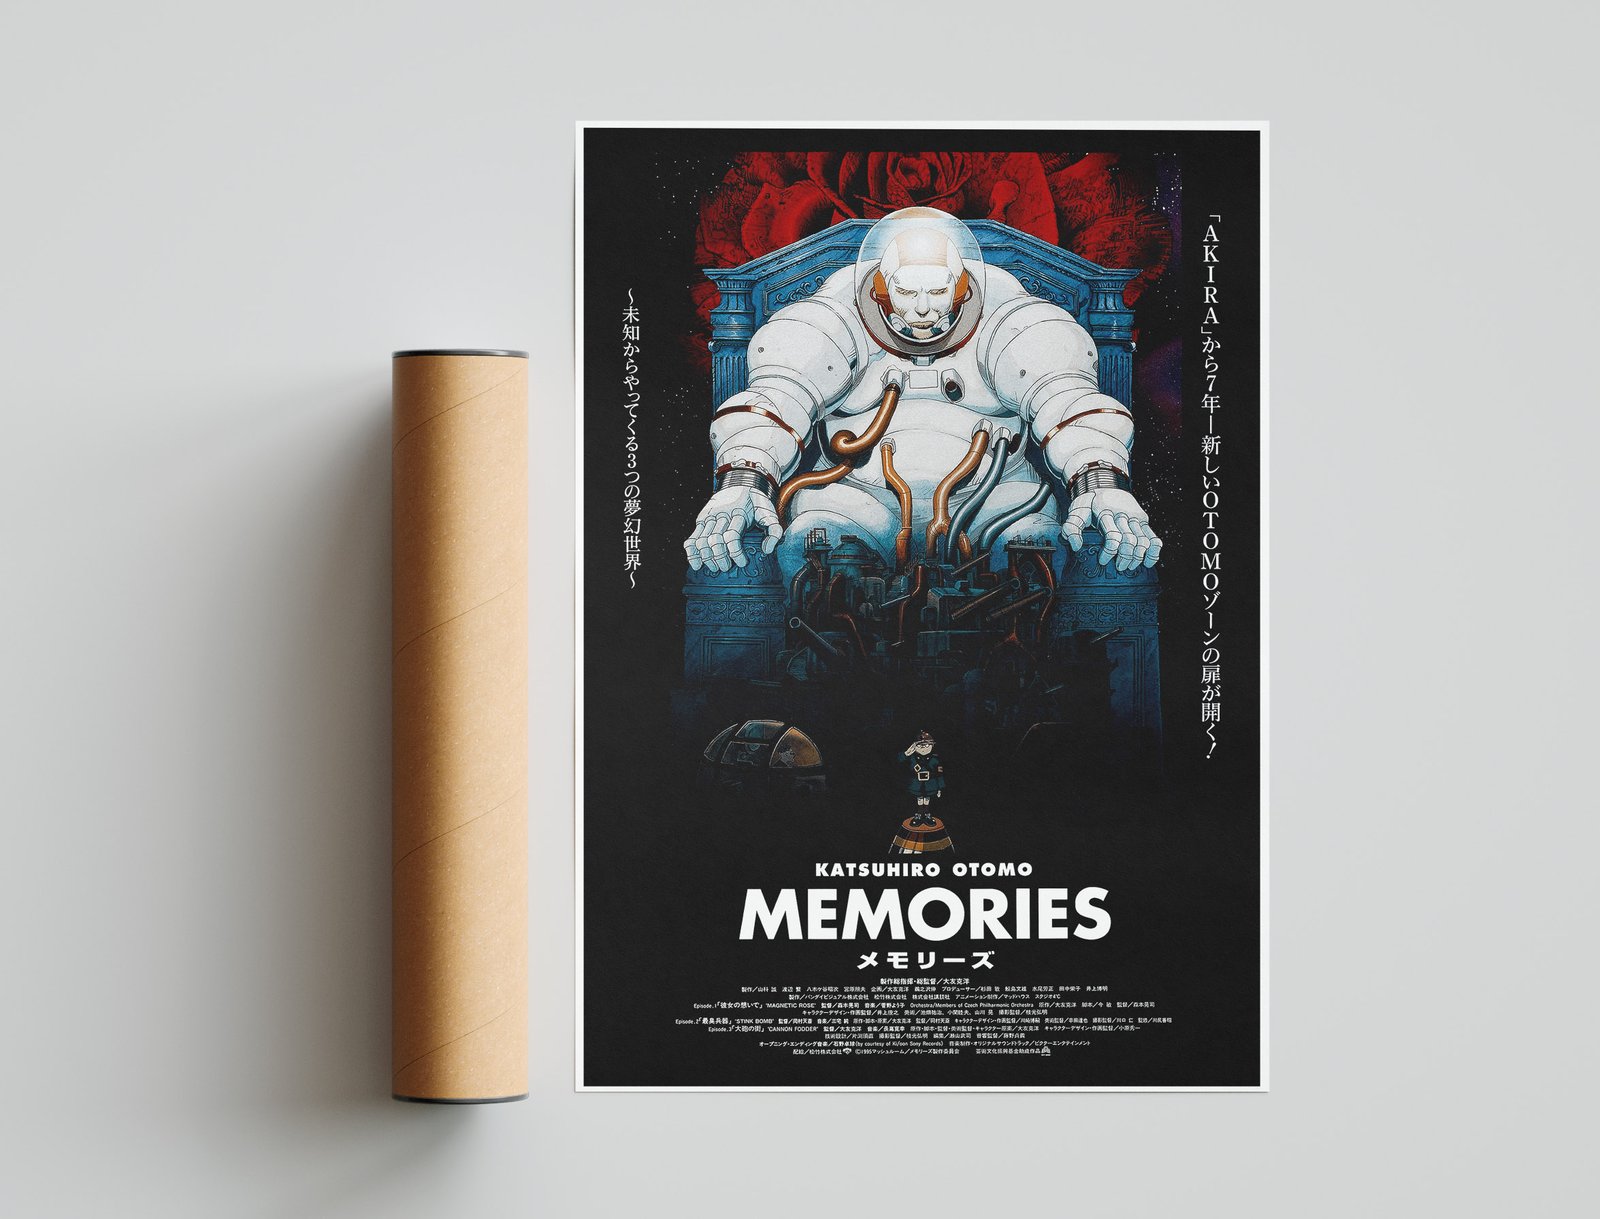 Anime  Memories Bluray Collectors Limited Edition Anime Limited UK   HiDef Ninja  Pop Culture  Movie Collectible Community